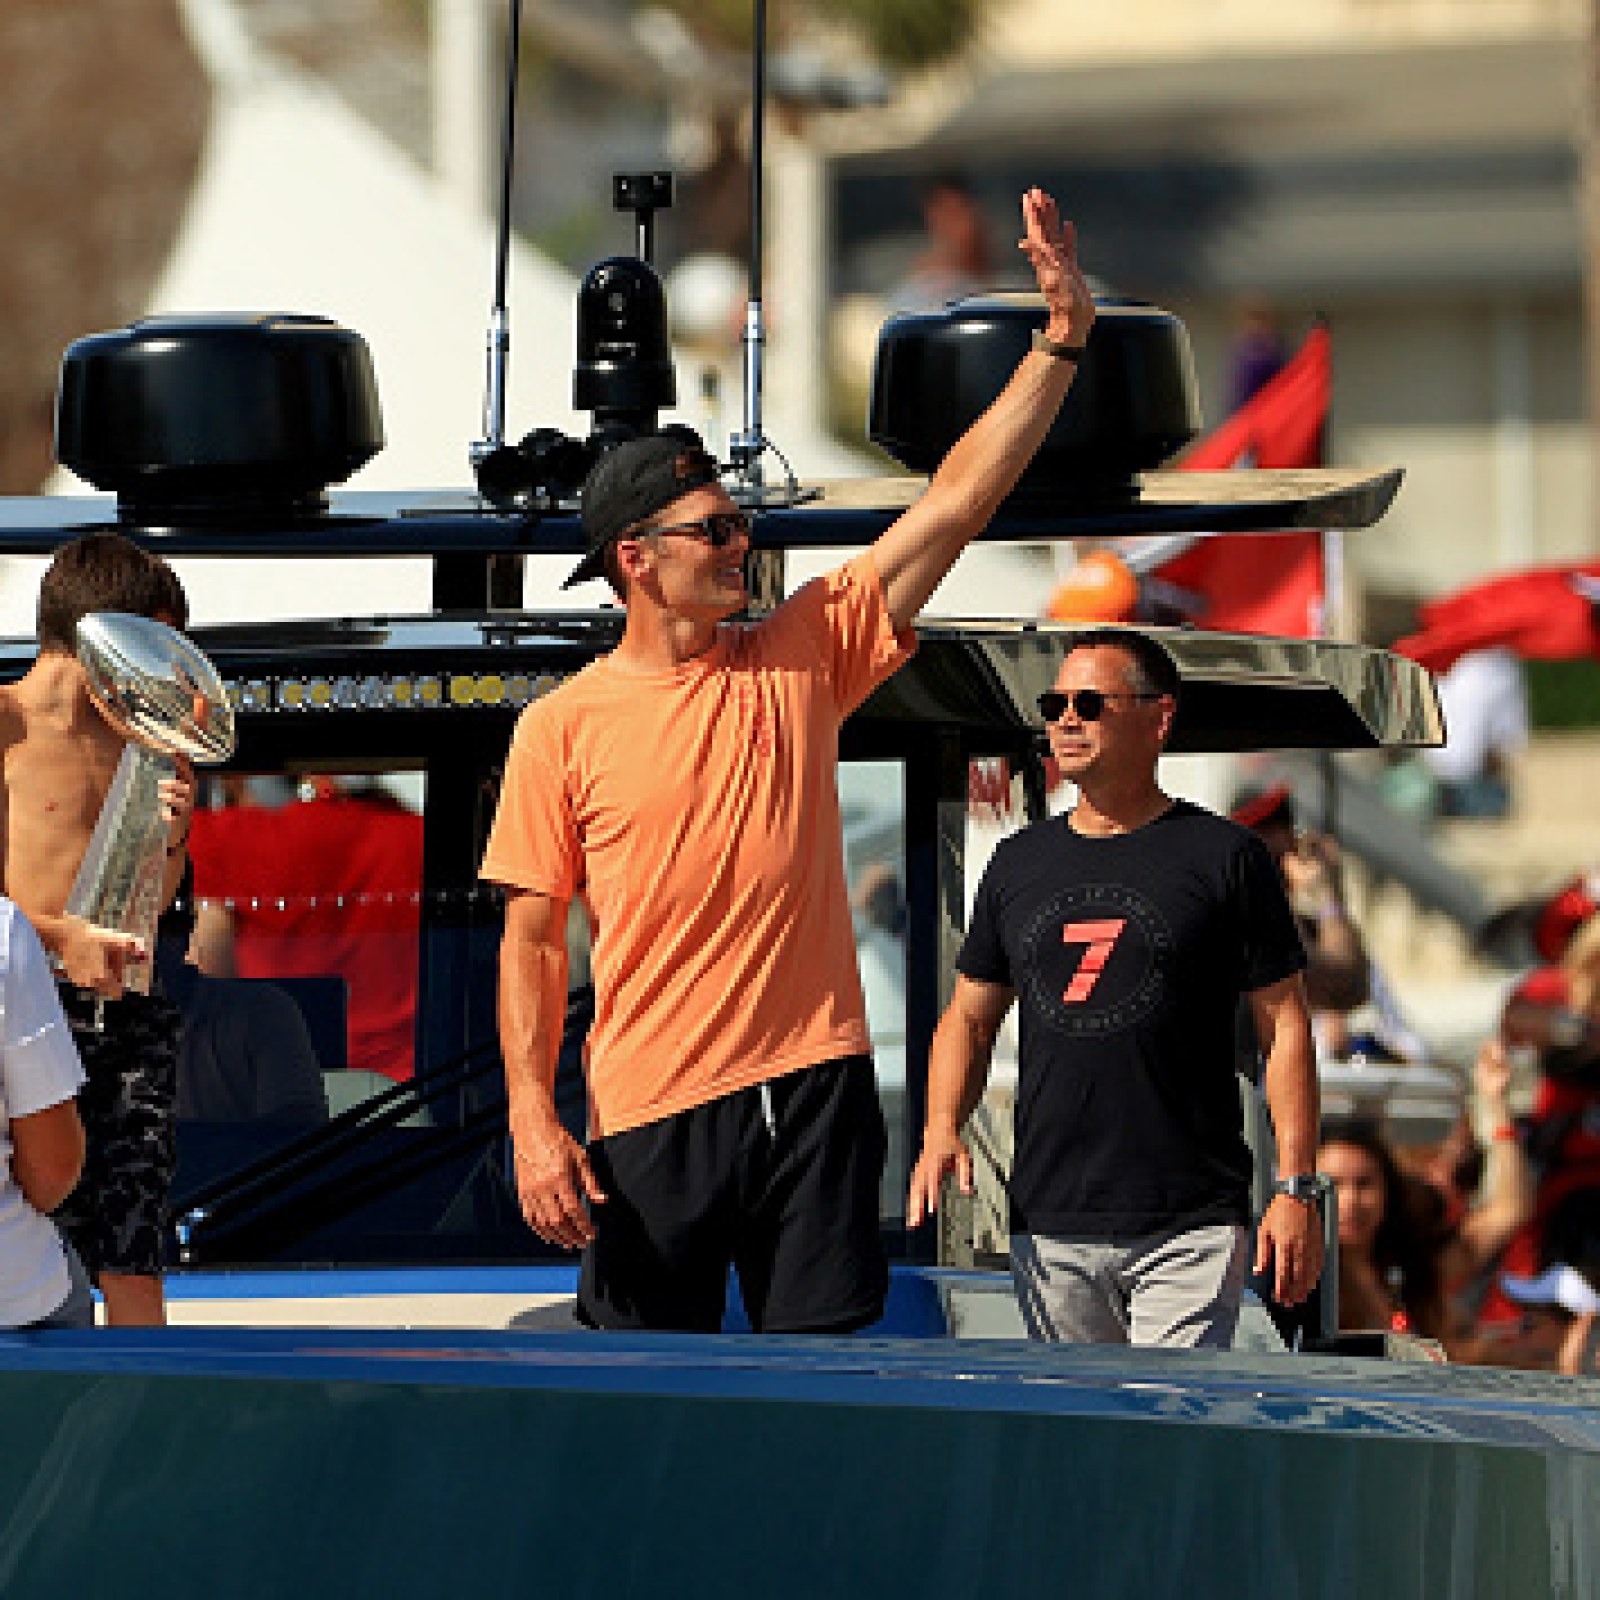 Tom Brady Tosses Super Bowl Trophy From Boat to Boat During Victory Flotilla